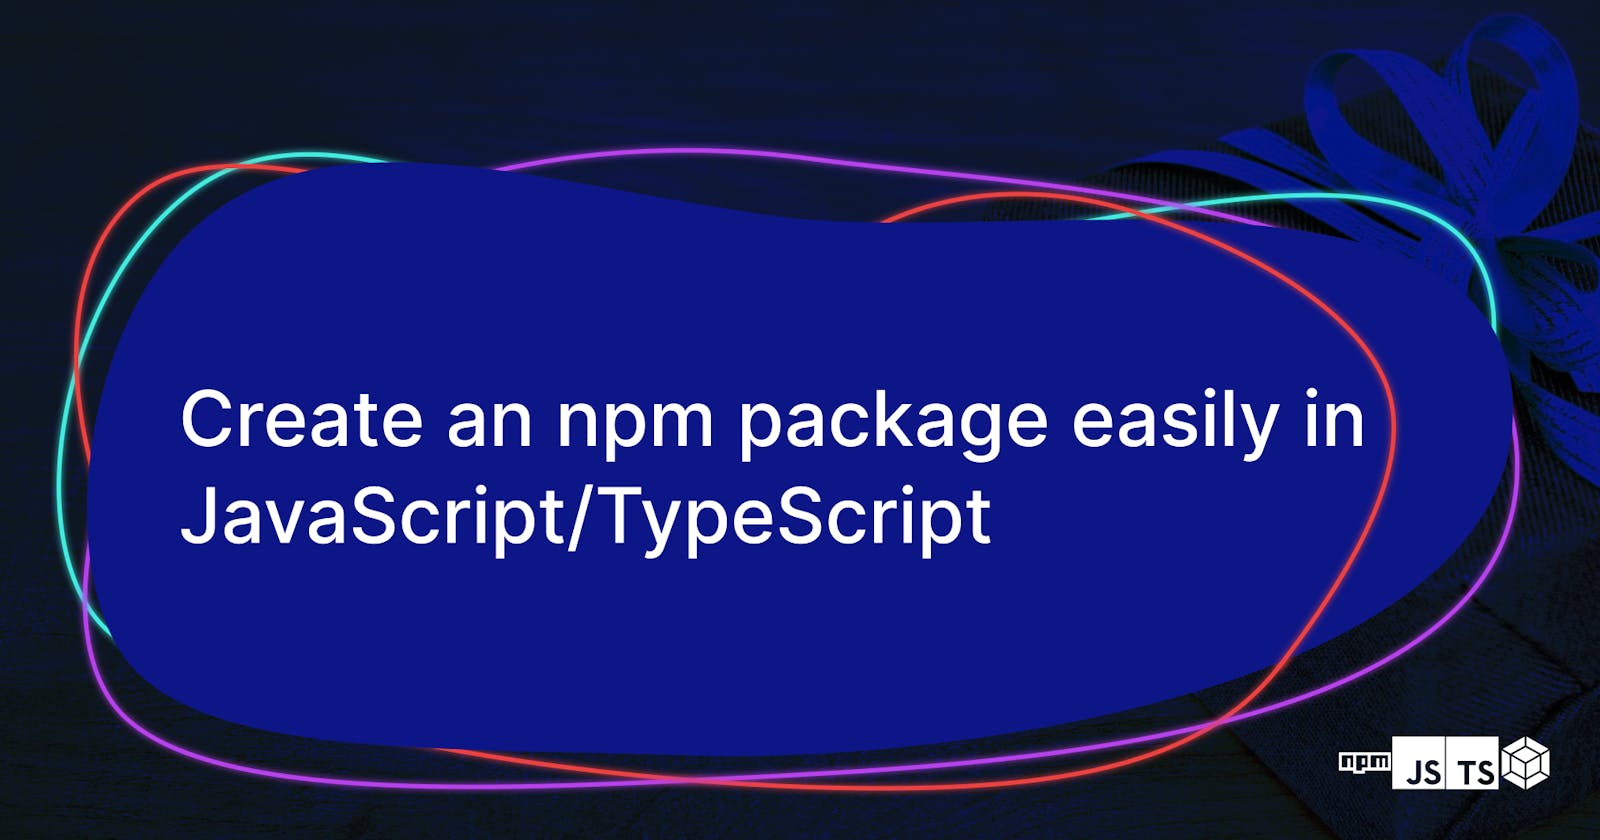 Create an npm package easily in JavaScript/TypeScript